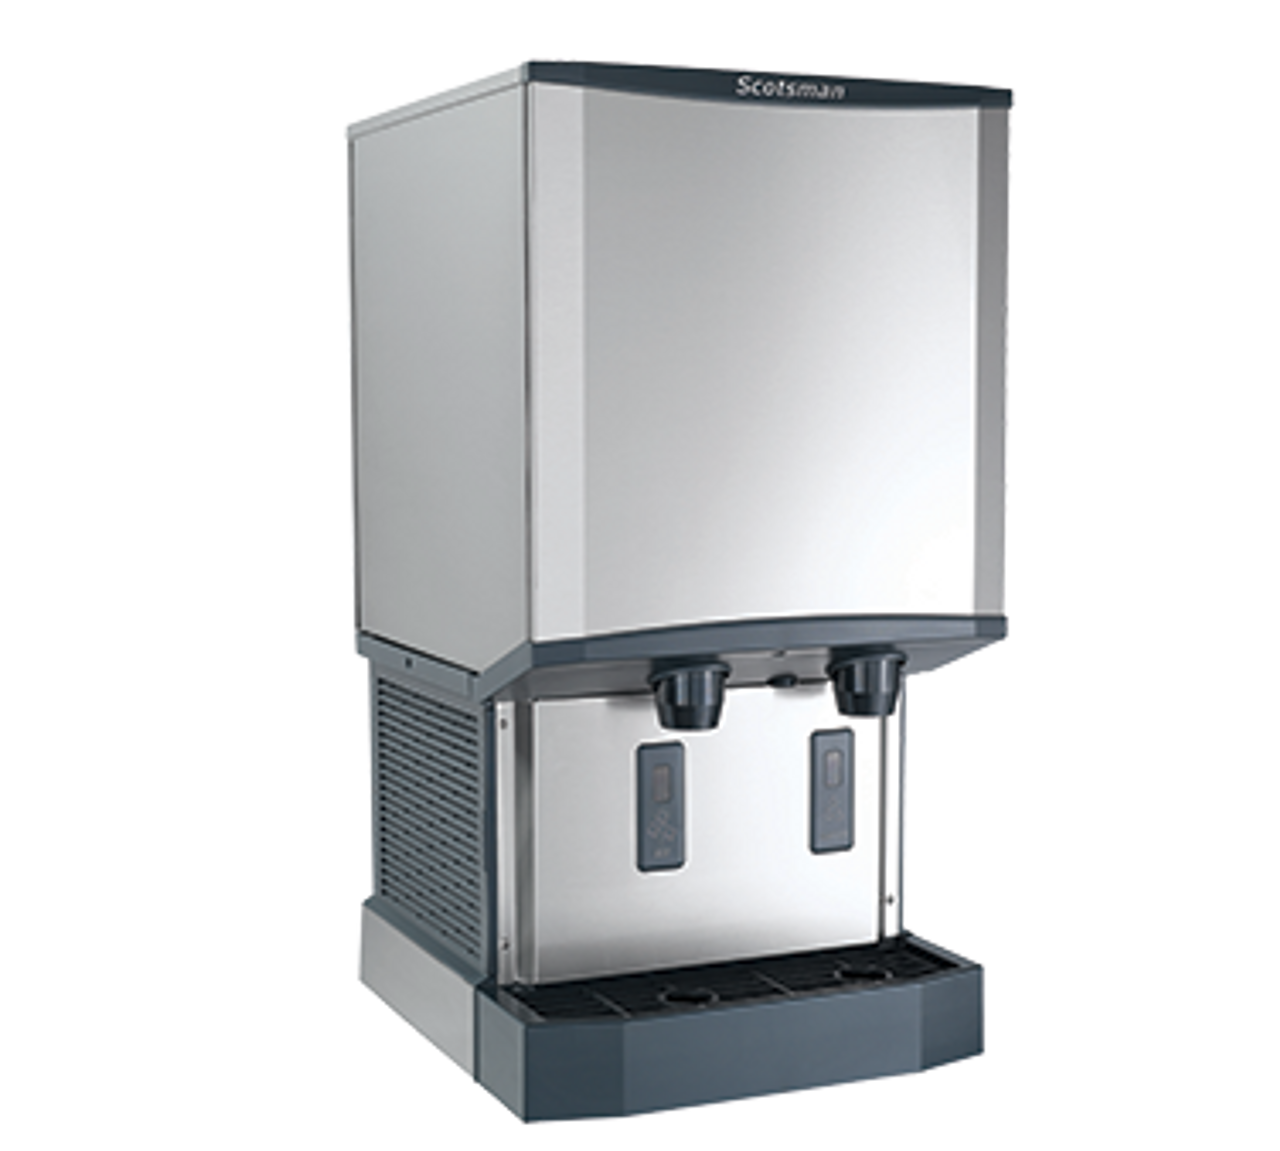 Meridian™ Ice & Water Dispenser, Touchfree® infrared dispensing, H2 Nugget Ice, air-cooled, production capacity up to 500 lb/24 hours at 70°/50° (365 lb AHRI certified at 90°/70°), 40 lb bin storage capacity,  sealed maintenance-free bearings, removable bin, removable air filter, removable spouts and sink, enlarged 0.8" sink drain, recessed utility chase, stainless steel evaporator and auger, enlarged 11" dispensing area, USB software upgrade port, unit specific QR code, stainless steel exterior, AgION™ antimicrobial protection, R-404a refrigerant, includes 7.5’ power cord with NEMA 5-15P plug, 115v/60/1-ph, 9.0 amps, cULus, NSF, CE, engineered and assembled in USA